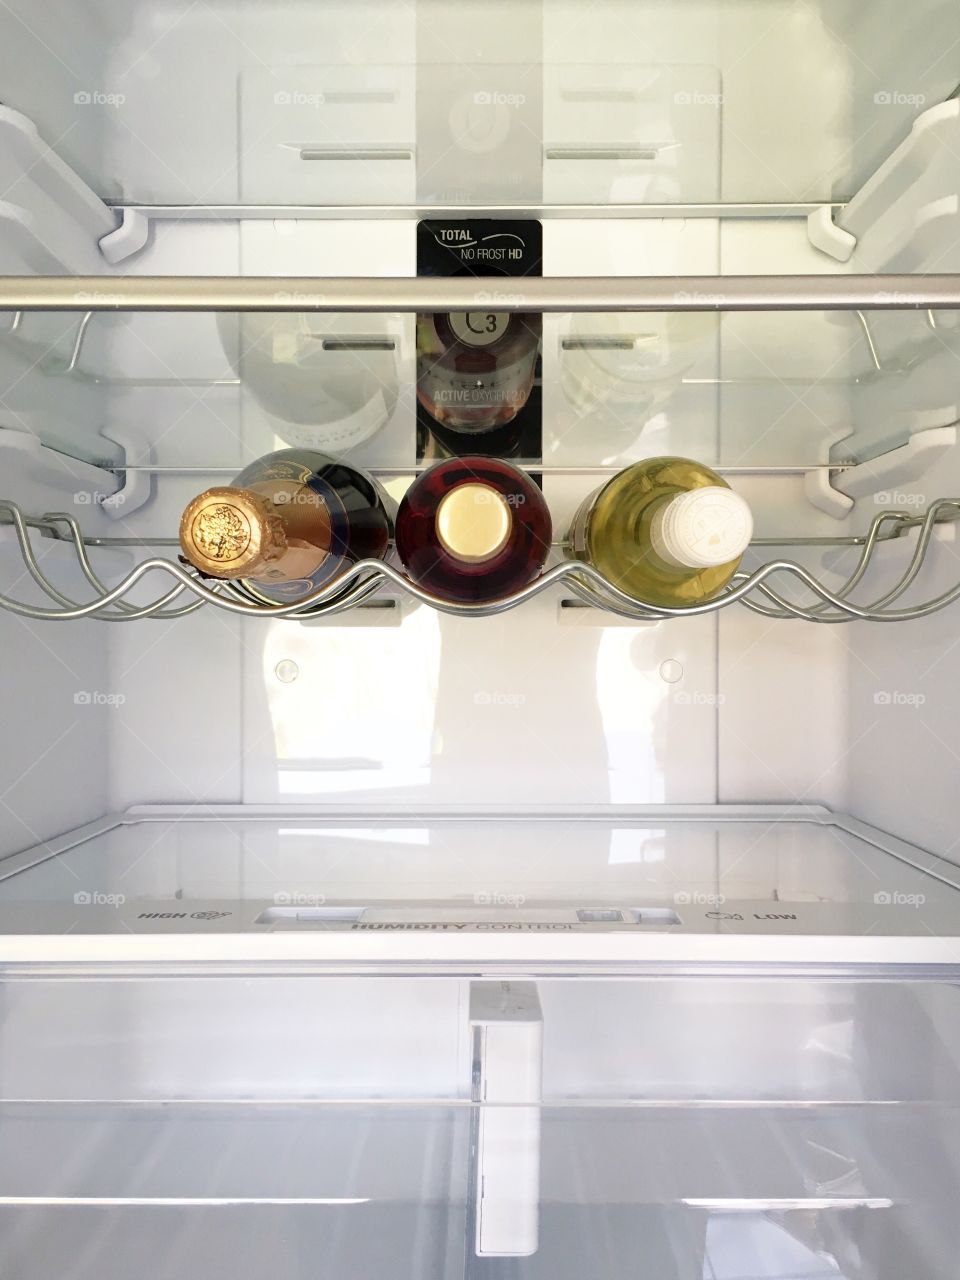 All the essentials in the fridge. Wine cooling. 